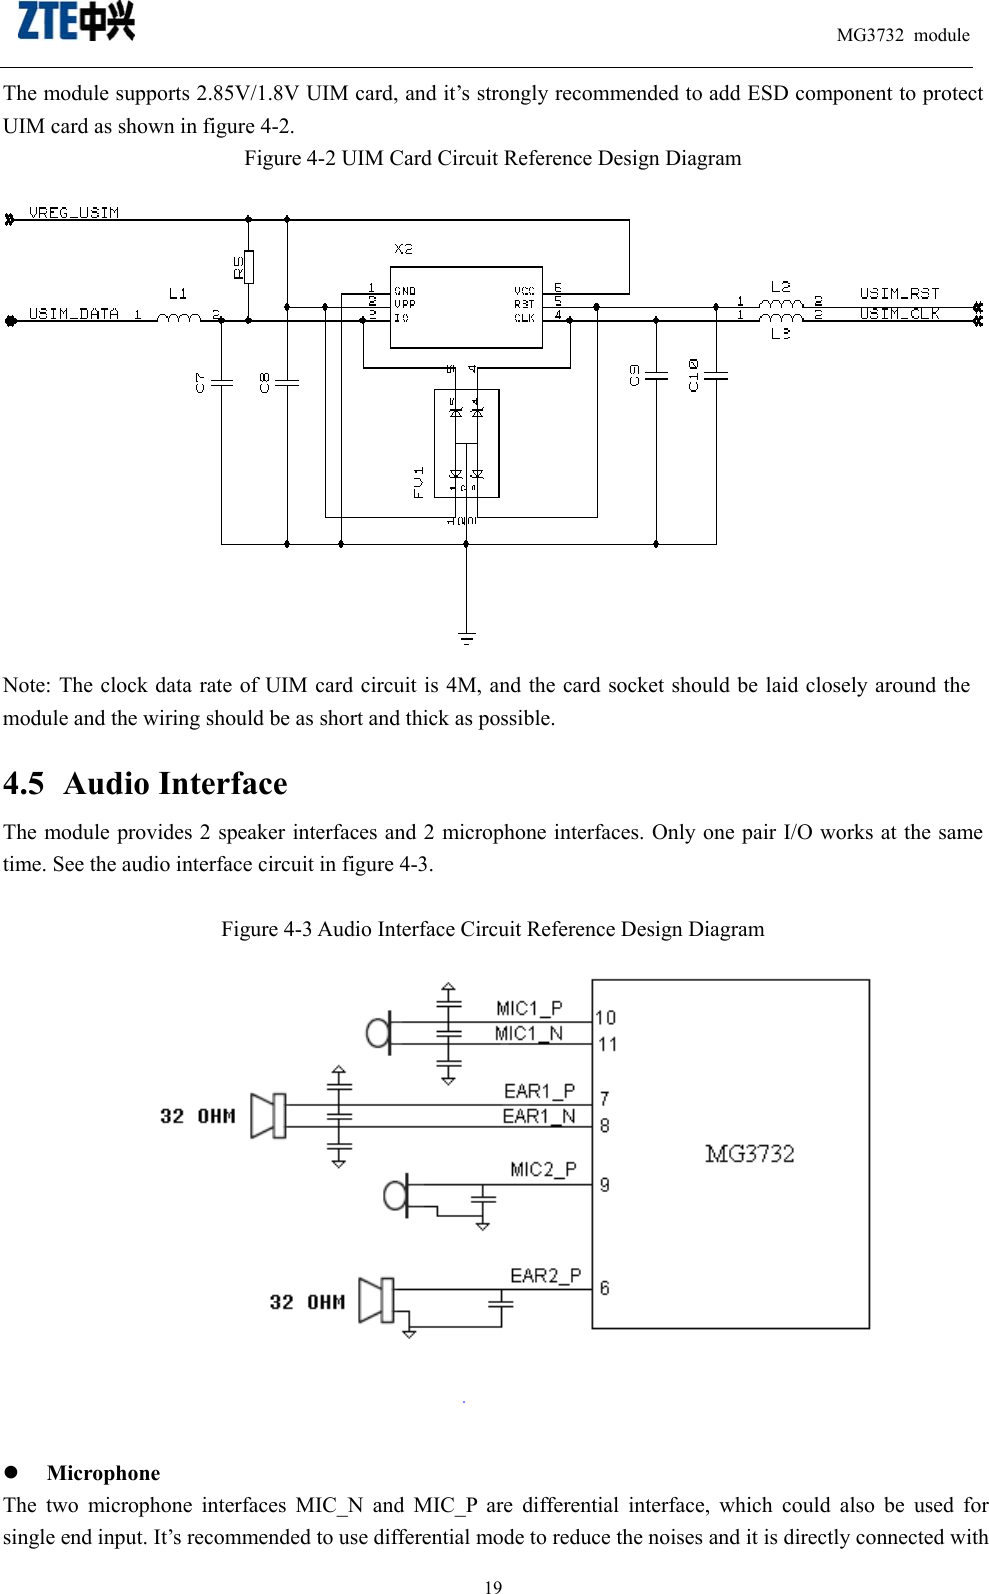                                                                          MG3732 module                                                    19The module supports 2.85V/1.8V UIM card, and it’s strongly recommended to add ESD component to protect UIM card as shown in figure 4-2.   Figure 4-2 UIM Card Circuit Reference Design Diagram      Note: The clock data rate of UIM card circuit is 4M, and the card socket should be laid closely around the module and the wiring should be as short and thick as possible. 4.5 Audio Interface The module provides 2 speaker interfaces and 2 microphone interfaces. Only one pair I/O works at the same time. See the audio interface circuit in figure 4-3.    Figure 4-3 Audio Interface Circuit Reference Design Diagram     Microphone The two microphone interfaces MIC_N and MIC_P are differential interface, which could also be used for single end input. It’s recommended to use differential mode to reduce the noises and it is directly connected with 